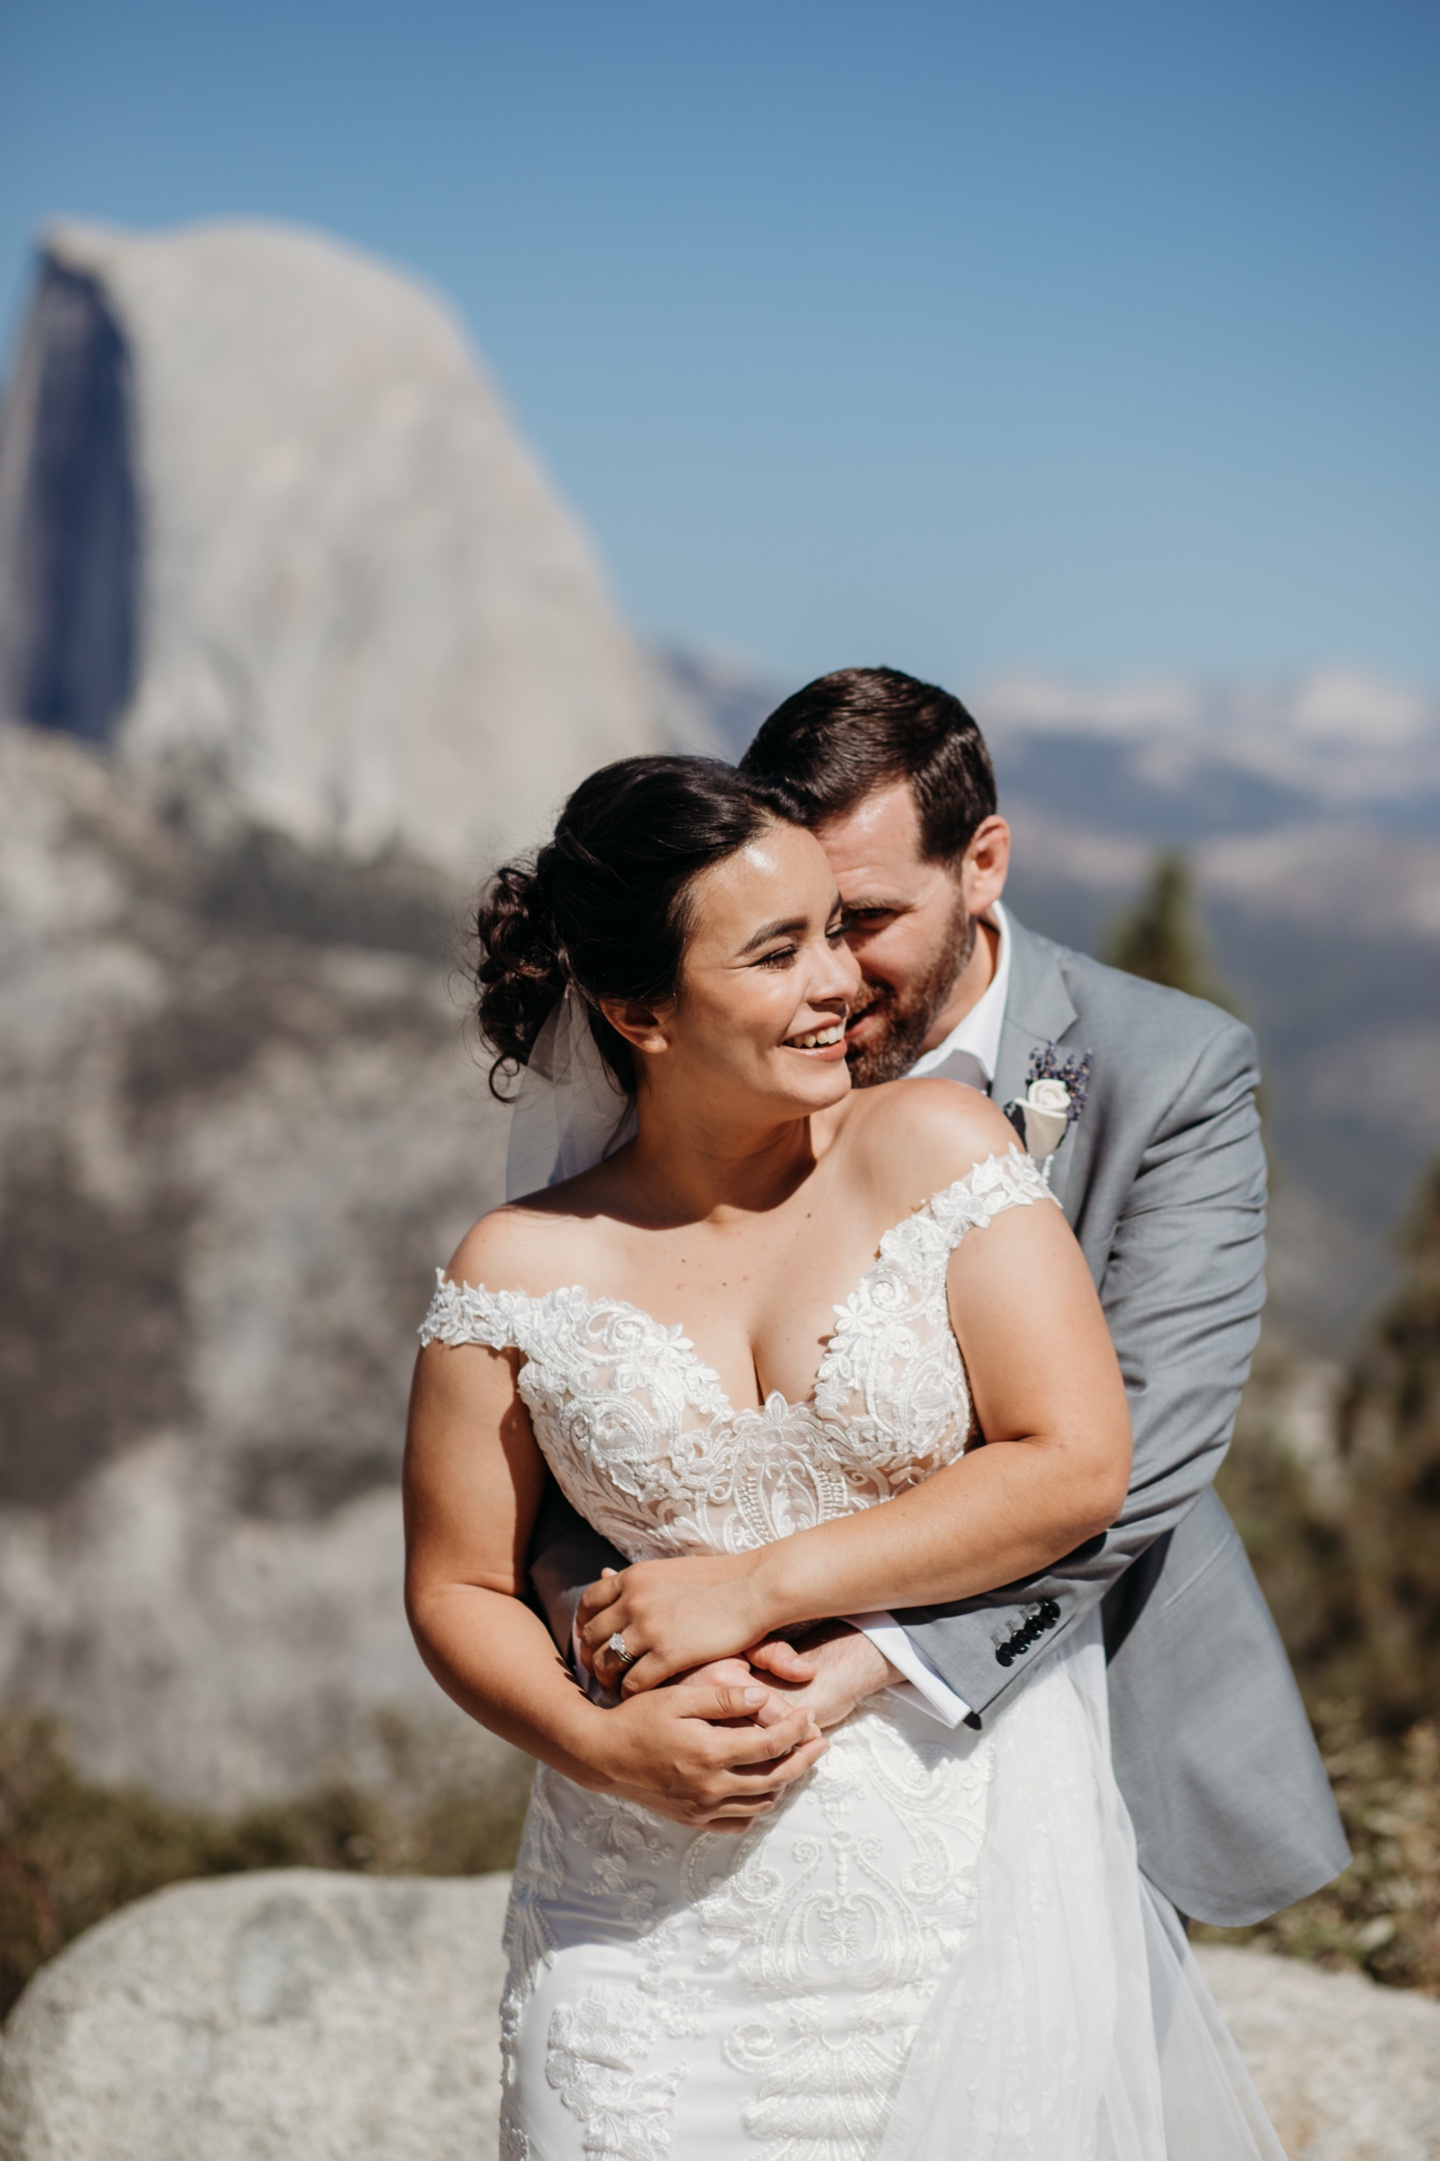 Groom hugs bride from behind while they smile widely after their Yosemite elopement.